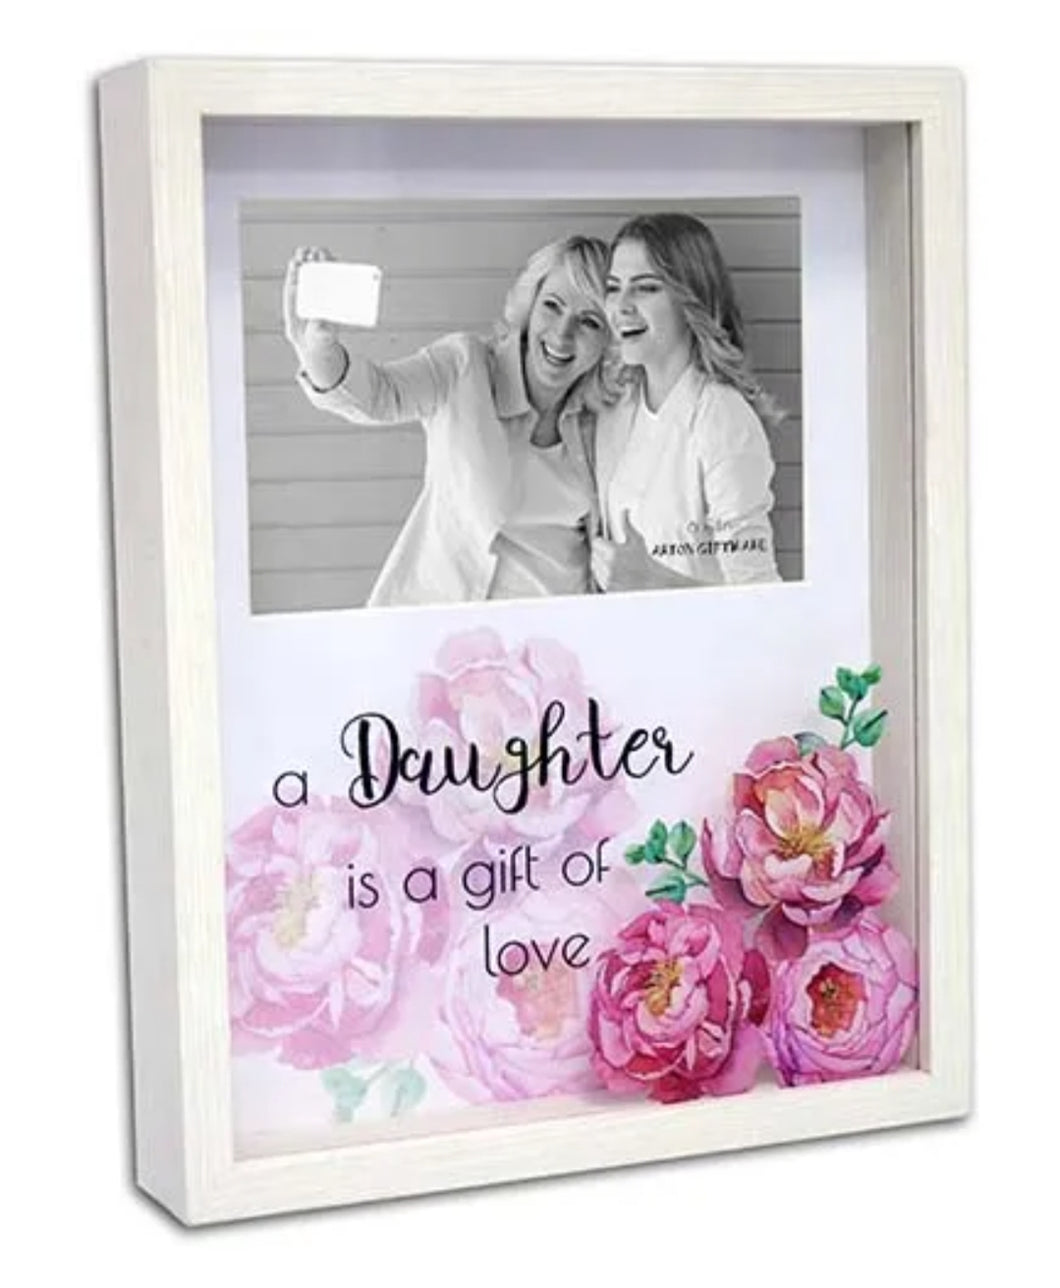 Magic moments photo frame 6x4 daughter-Gift a Little gift shop